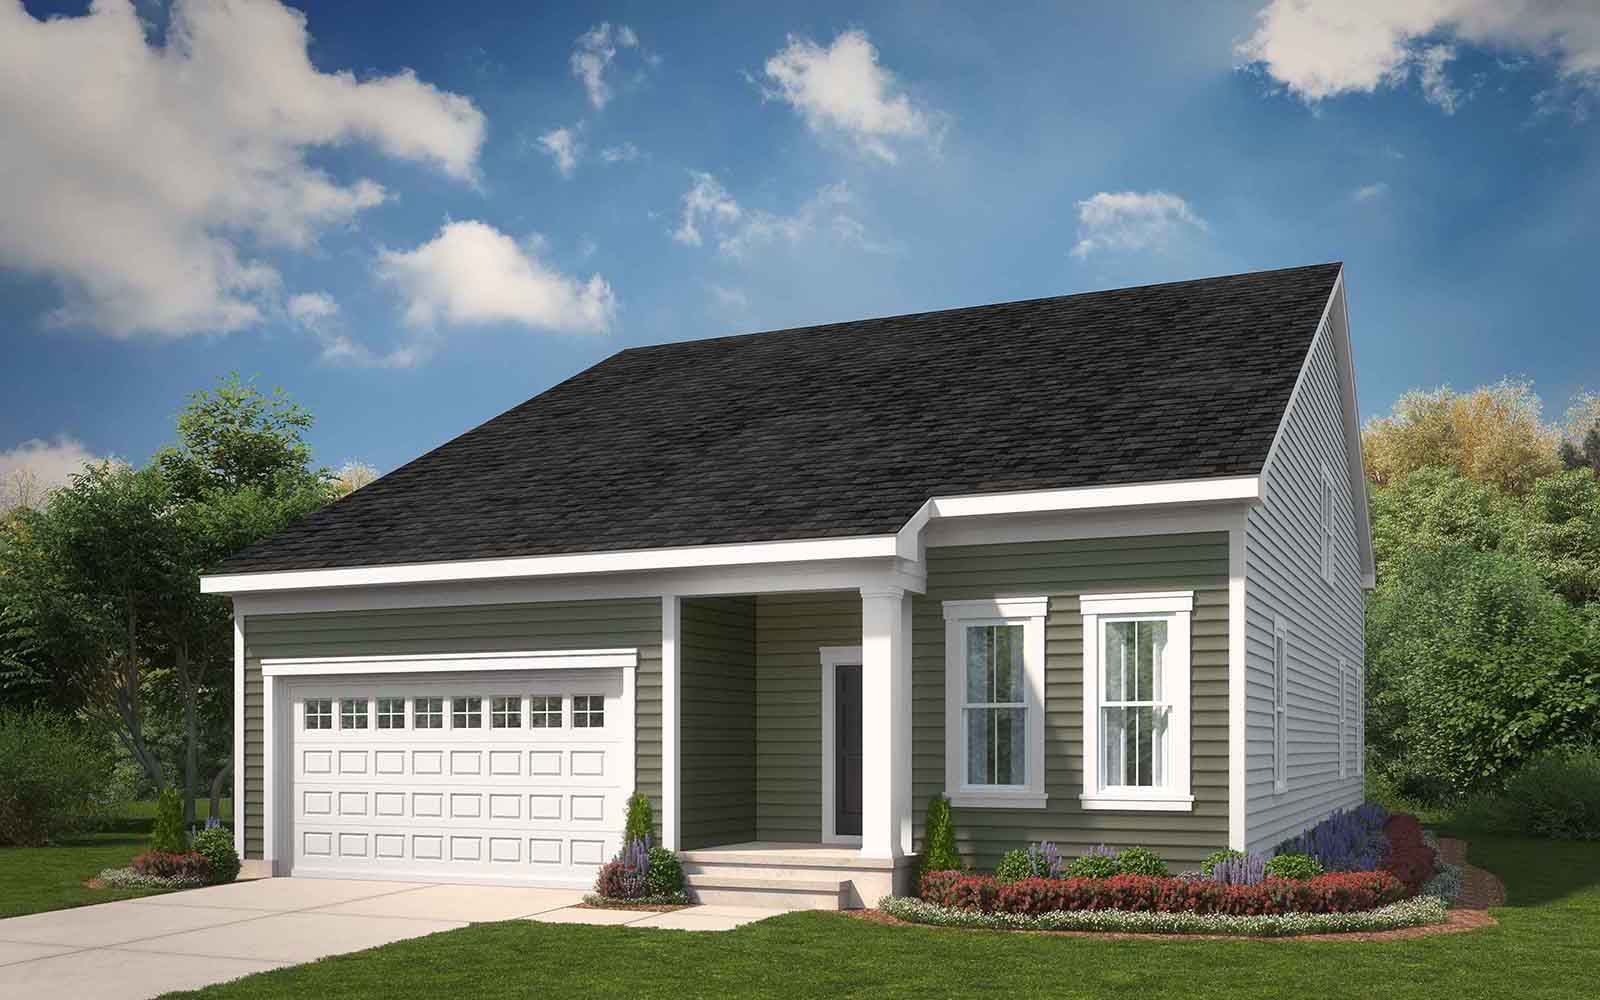 Elevation 1:Elevation 1 of the Picasso a home design offered at Heritage Shores in Bridgeville DE